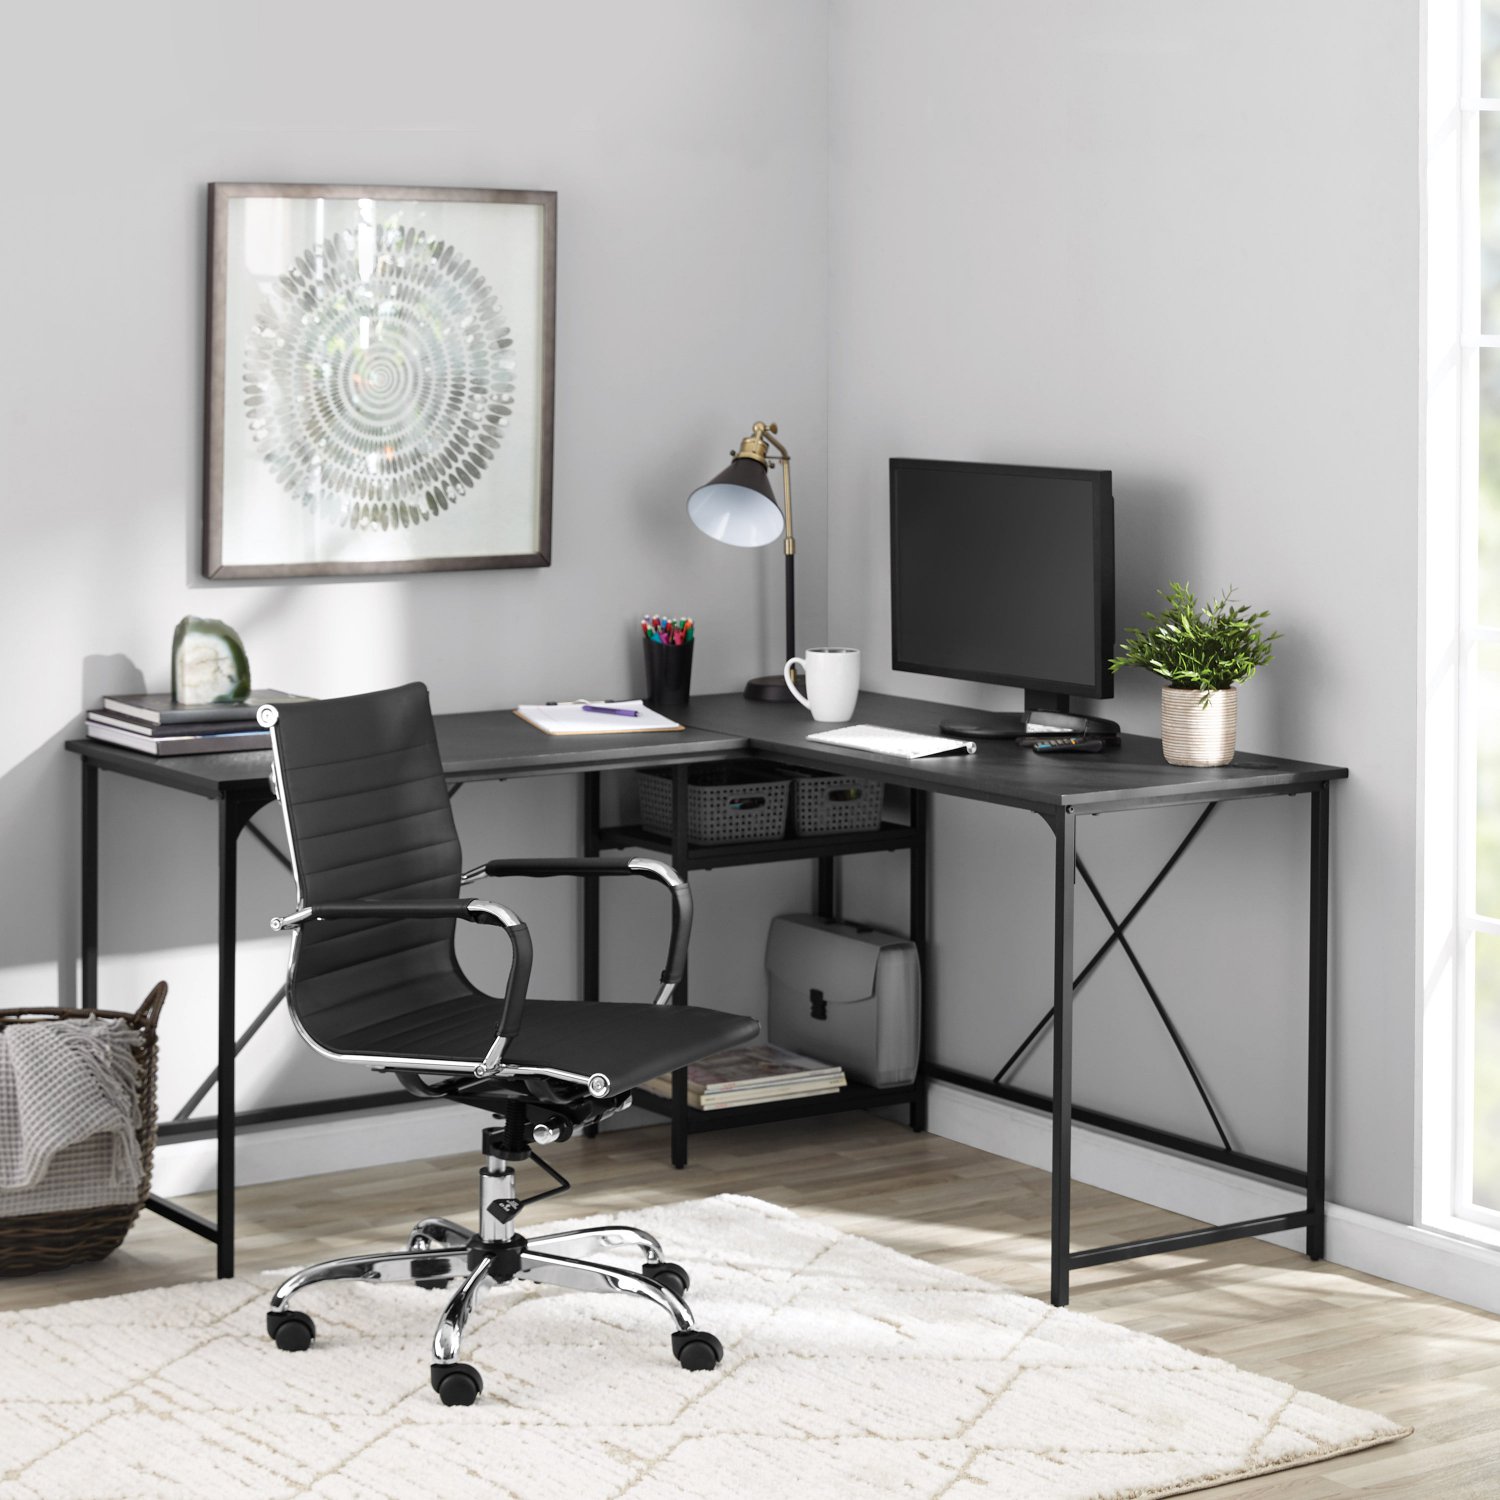 Mainstays Two-Way Convertible Desk with Lower Storage Shelf, Charcoal Finish & Metal Frame